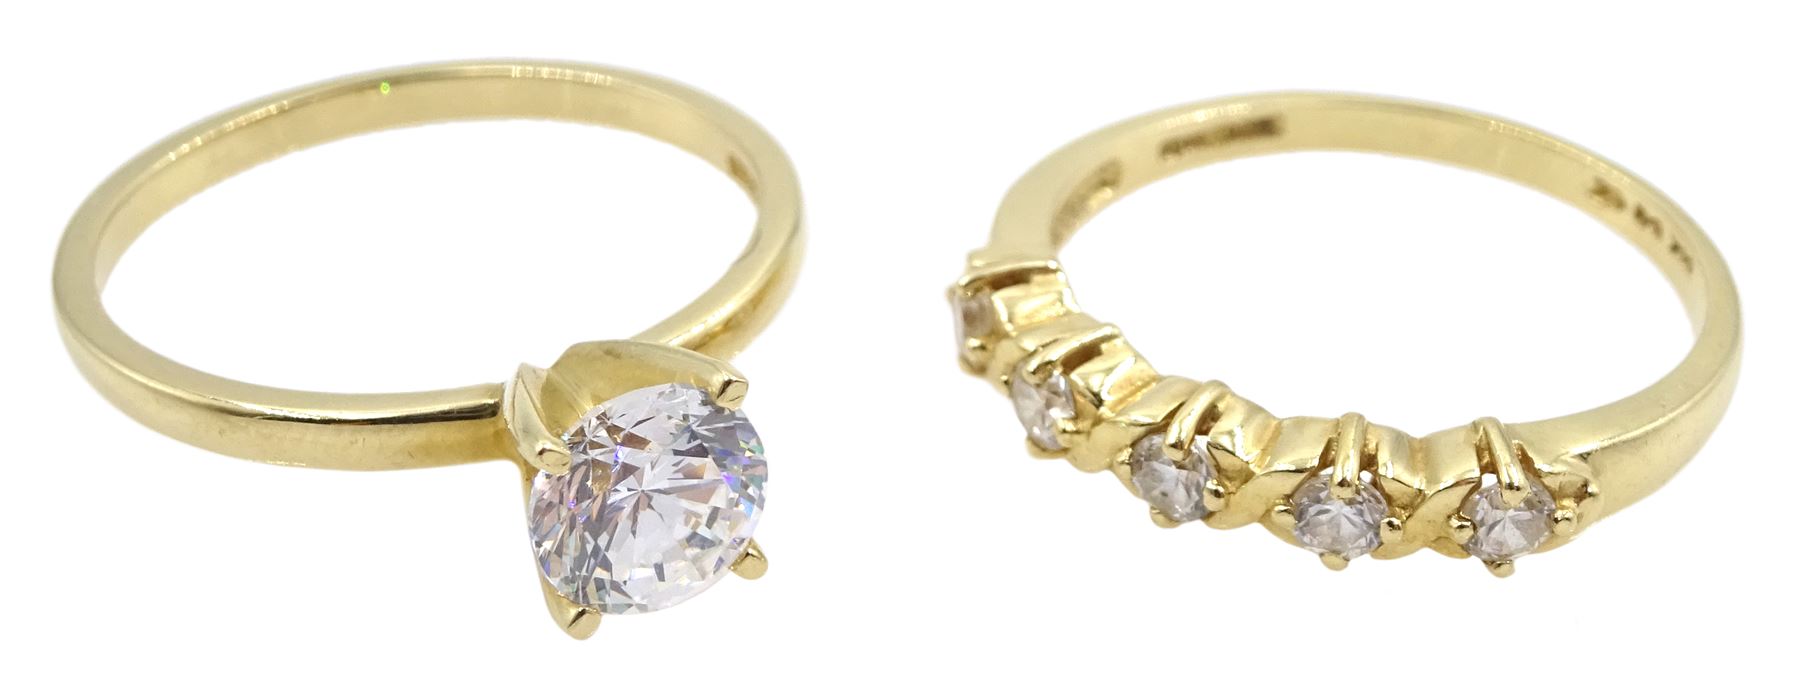 Gold single stone cubic zirconia ring and a gold five stone cubic zirconia ring